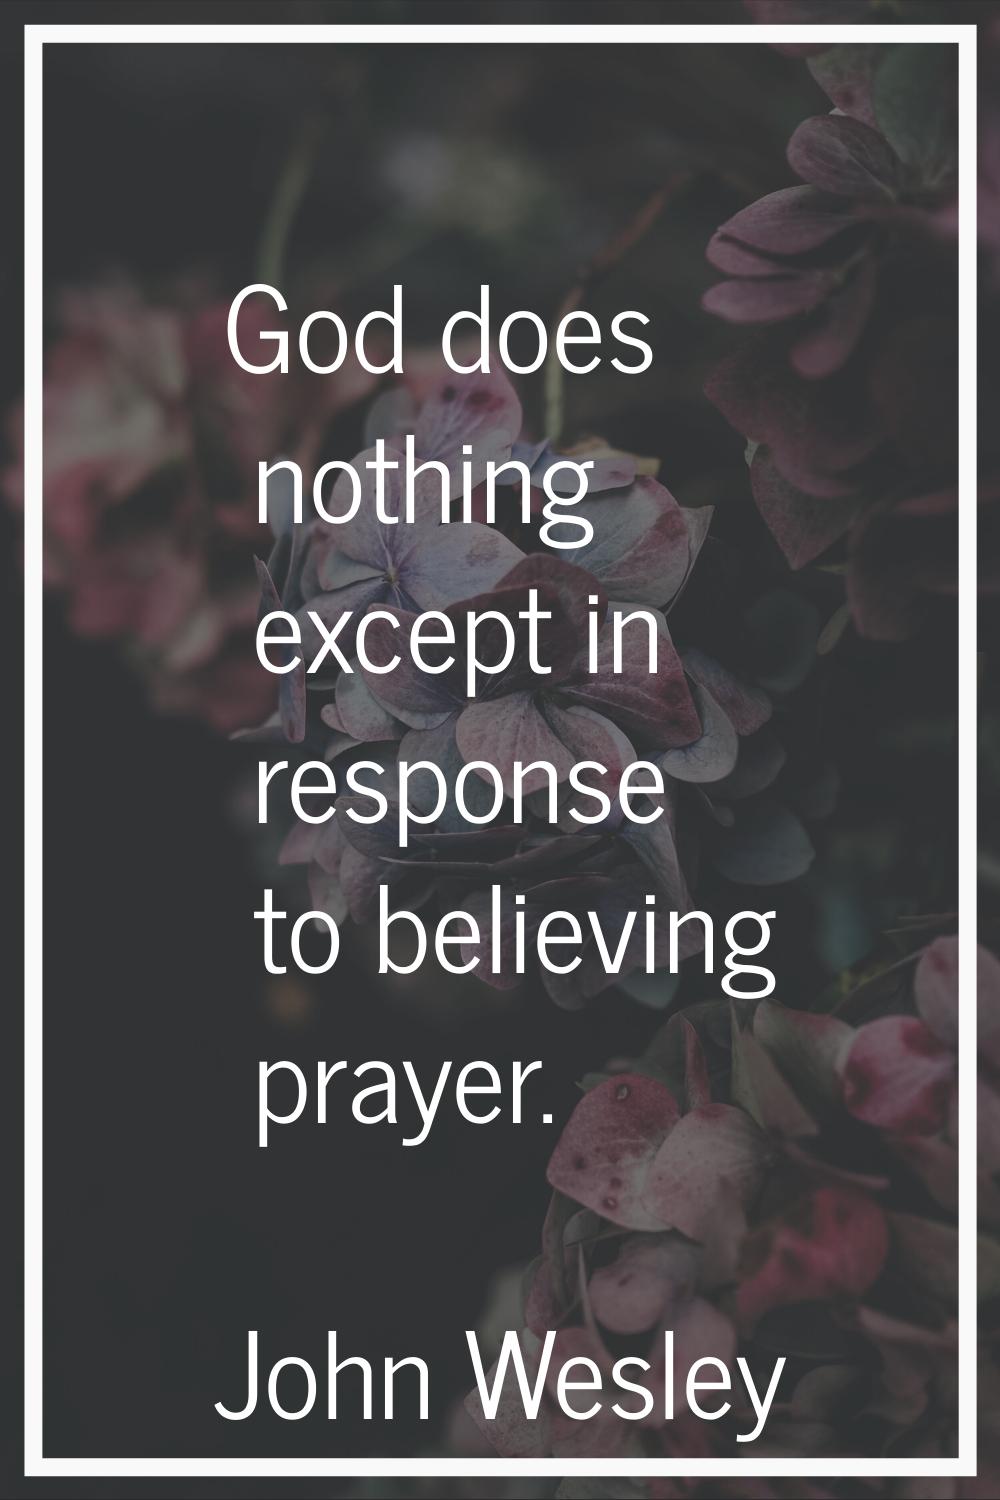 God does nothing except in response to believing prayer.